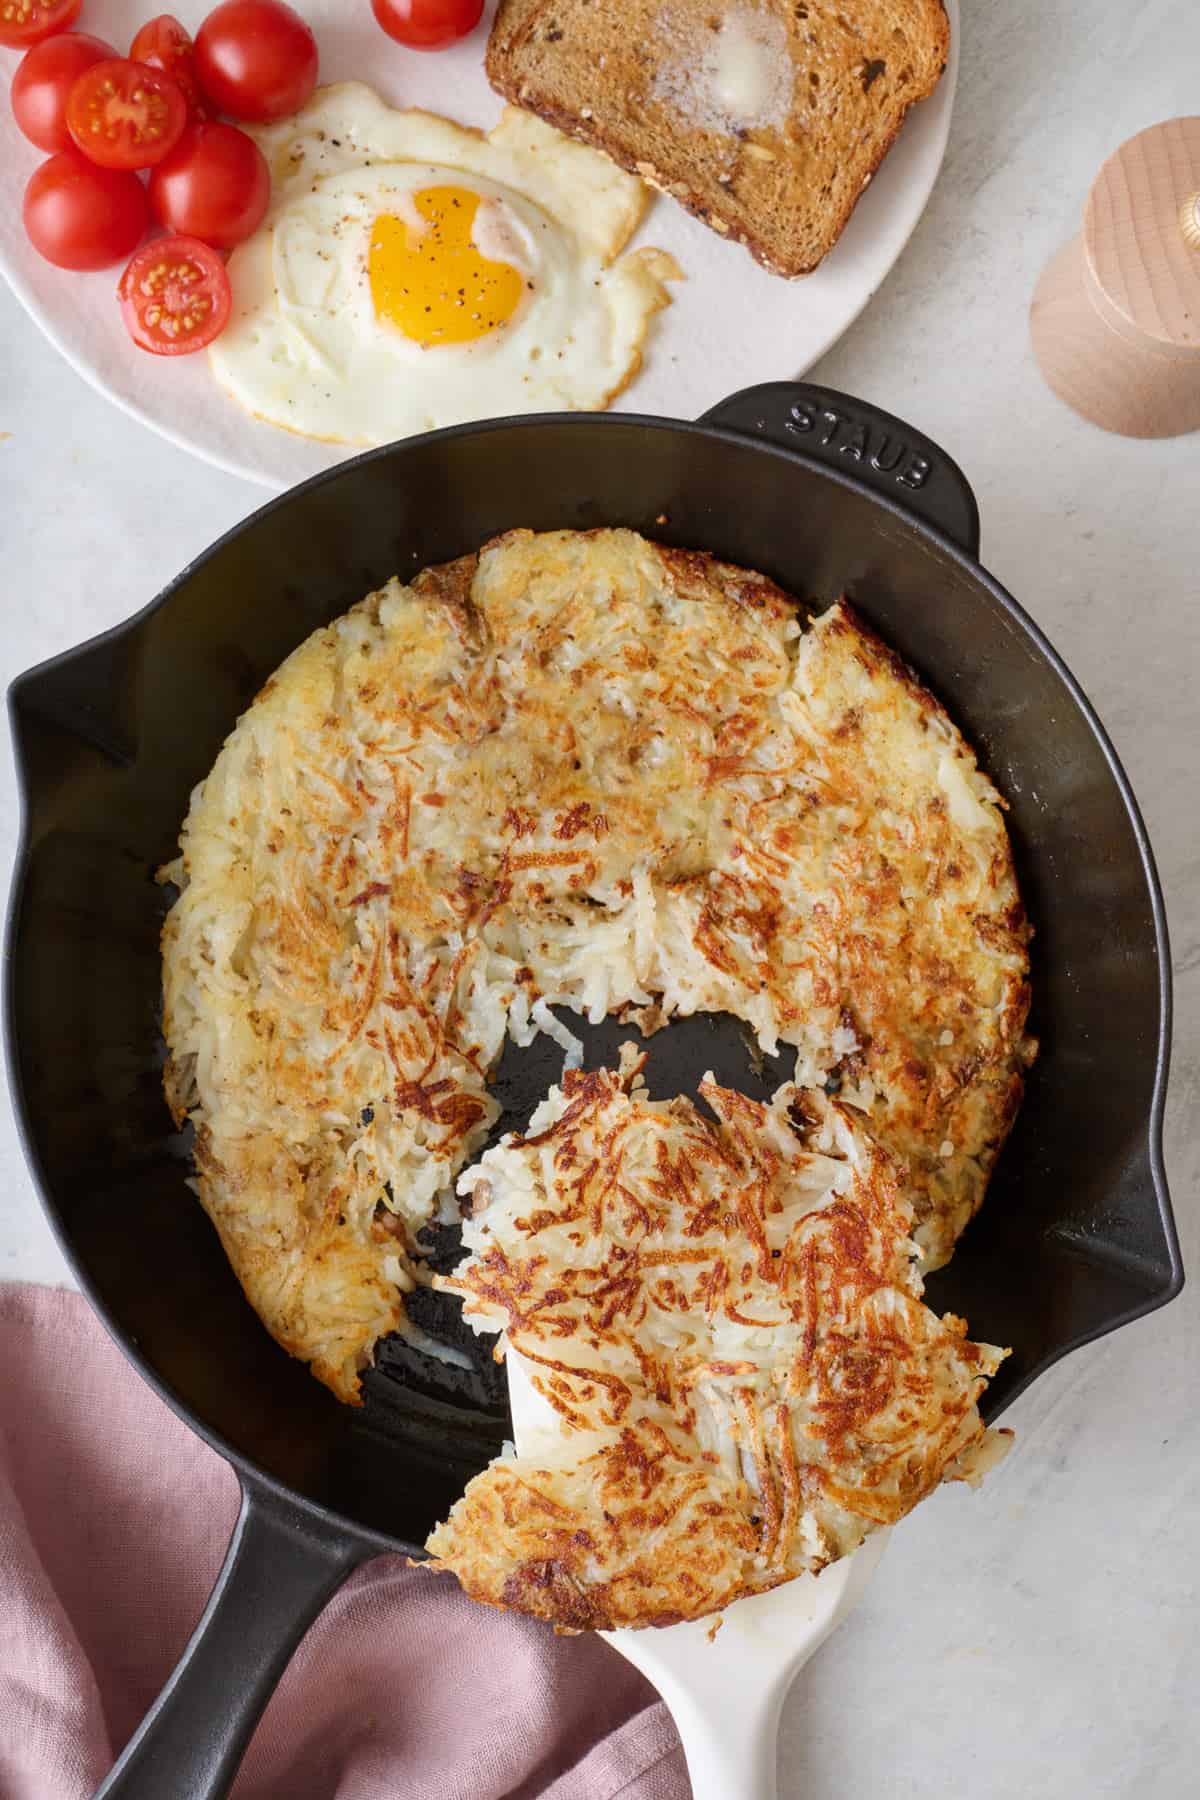 Spatula scooping out a serving of crispy hash browns from a skillet.